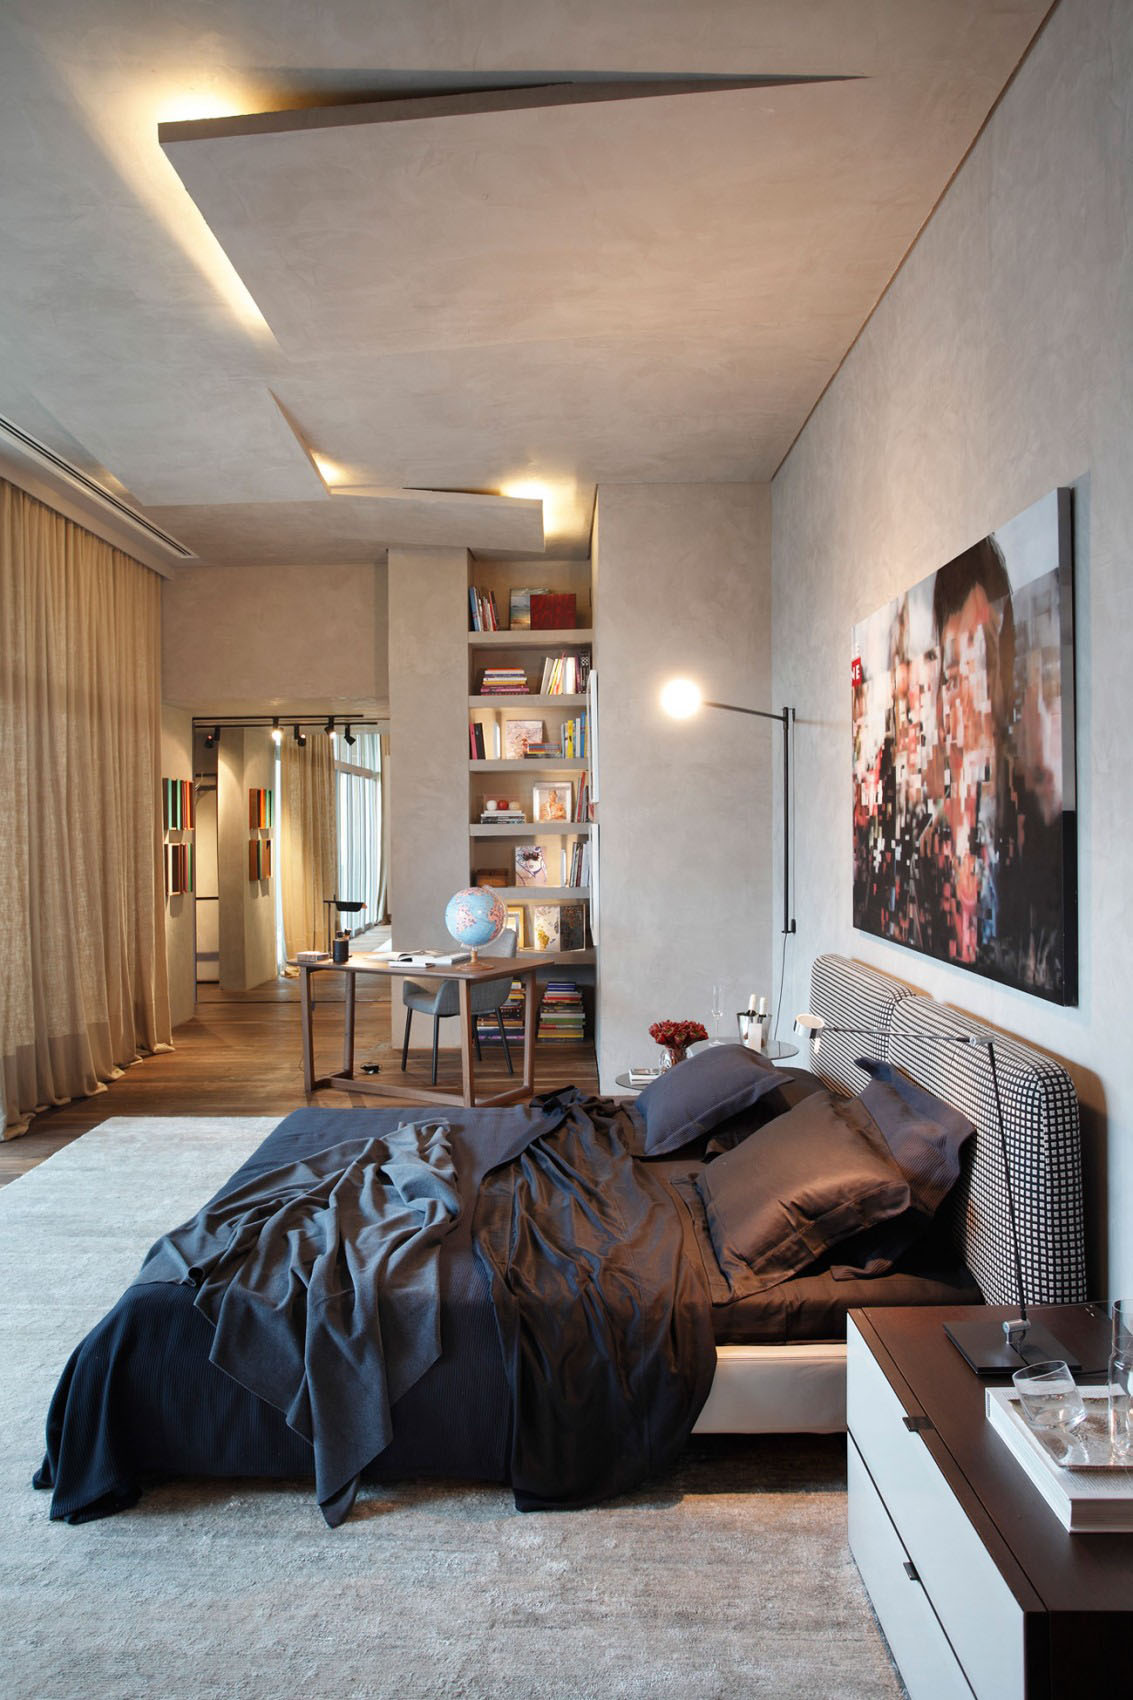 Bedroom Of By Stylish Bedroom Of Casa Cor By Gisele Taranto Architecture Completed With Modern Low Profile Bed And Home Office Area Bedroom  Bedroom Design Performing Eclectic Splendor 